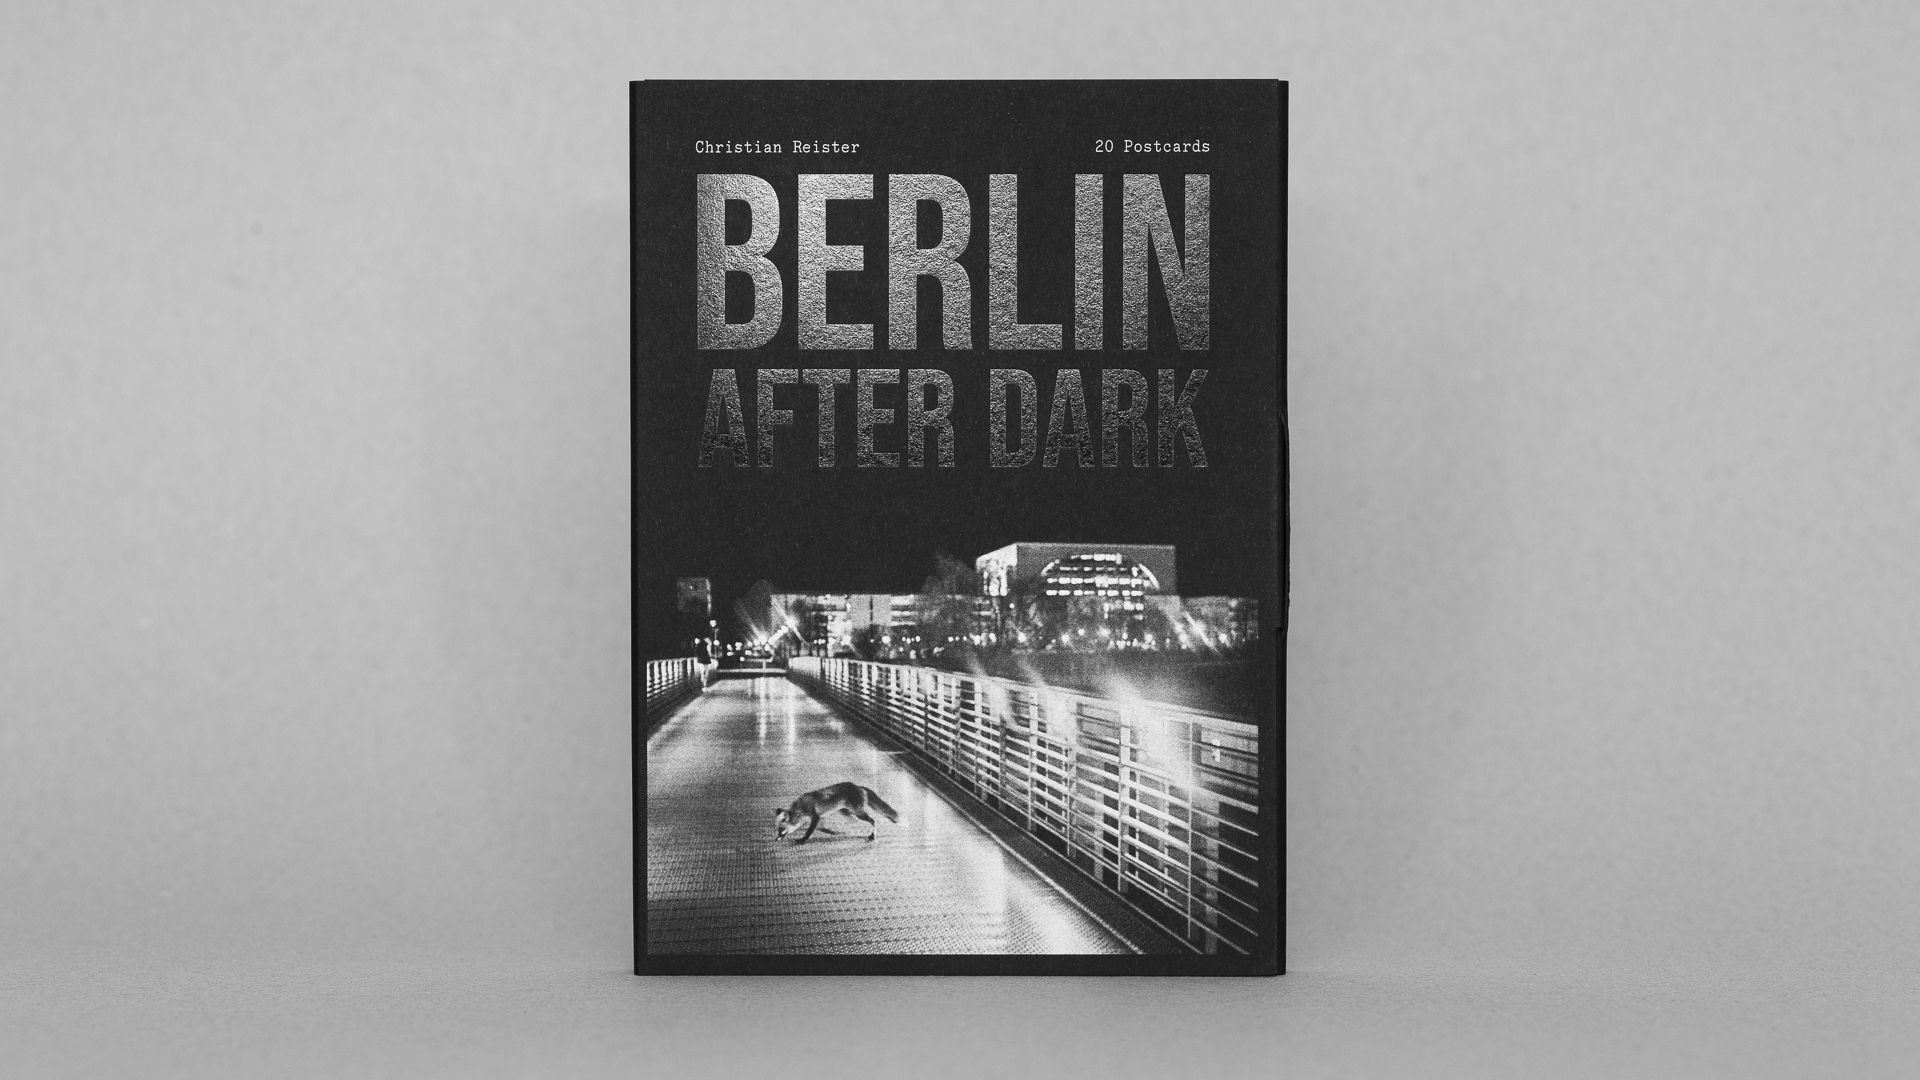 Postcard Book "Berlin After Dark" by Christina Reister: black and white Berlin night photography